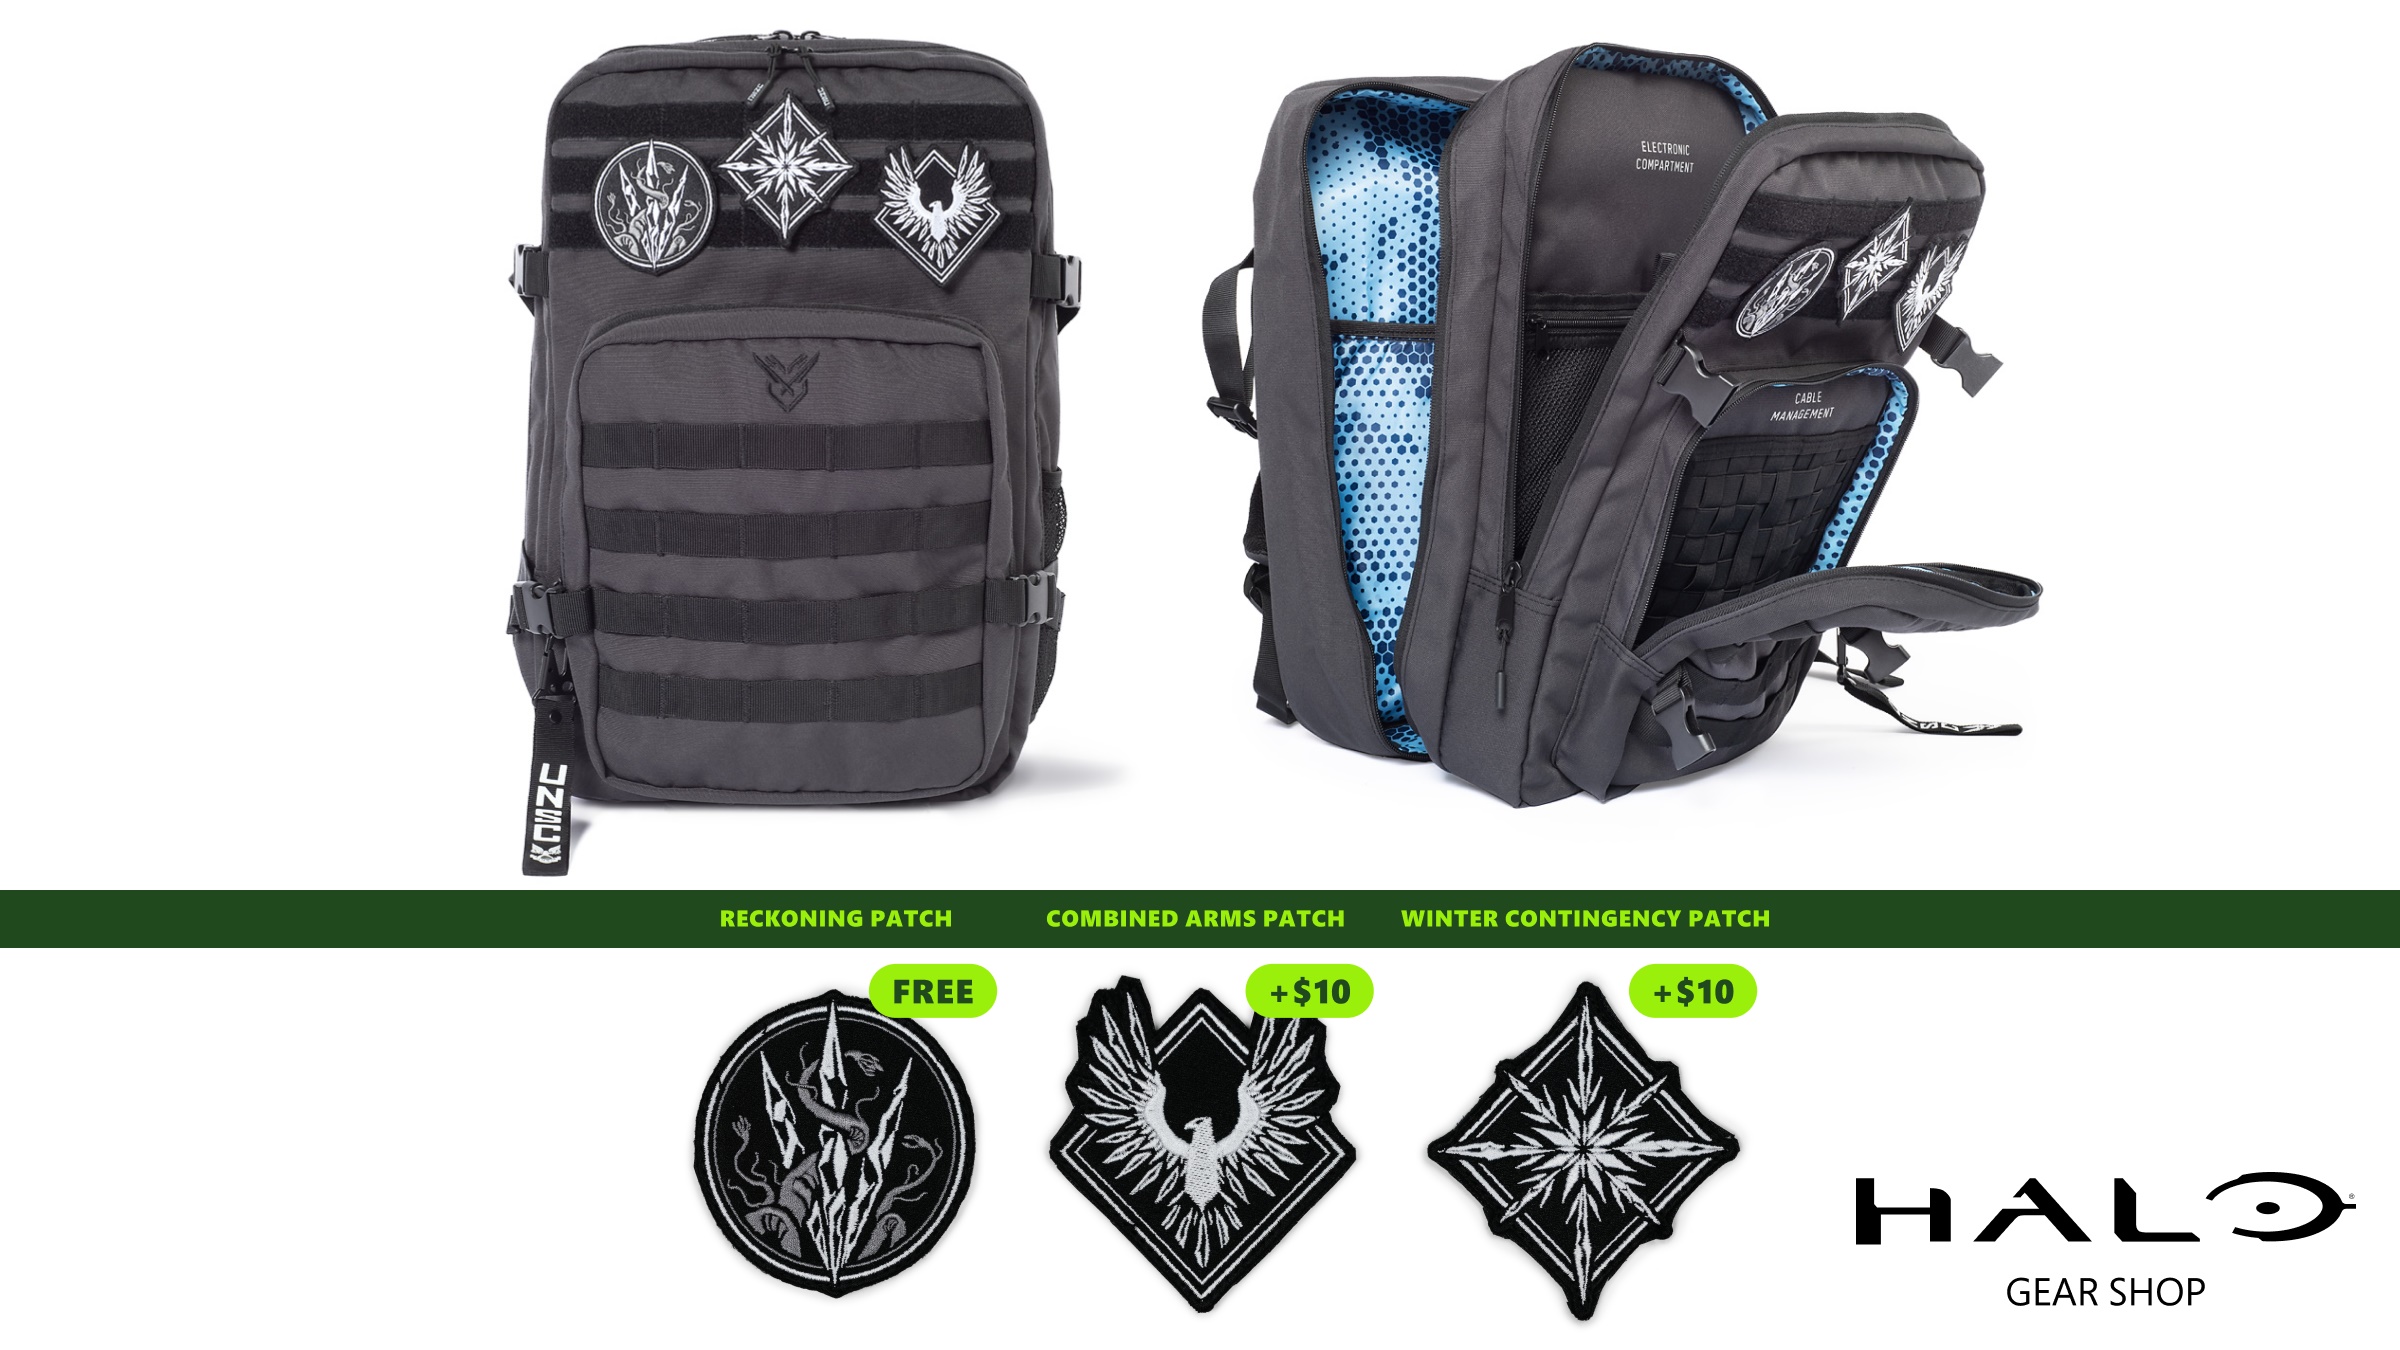 Image of the Halo Tactical Backpack and optional Season 5 patches